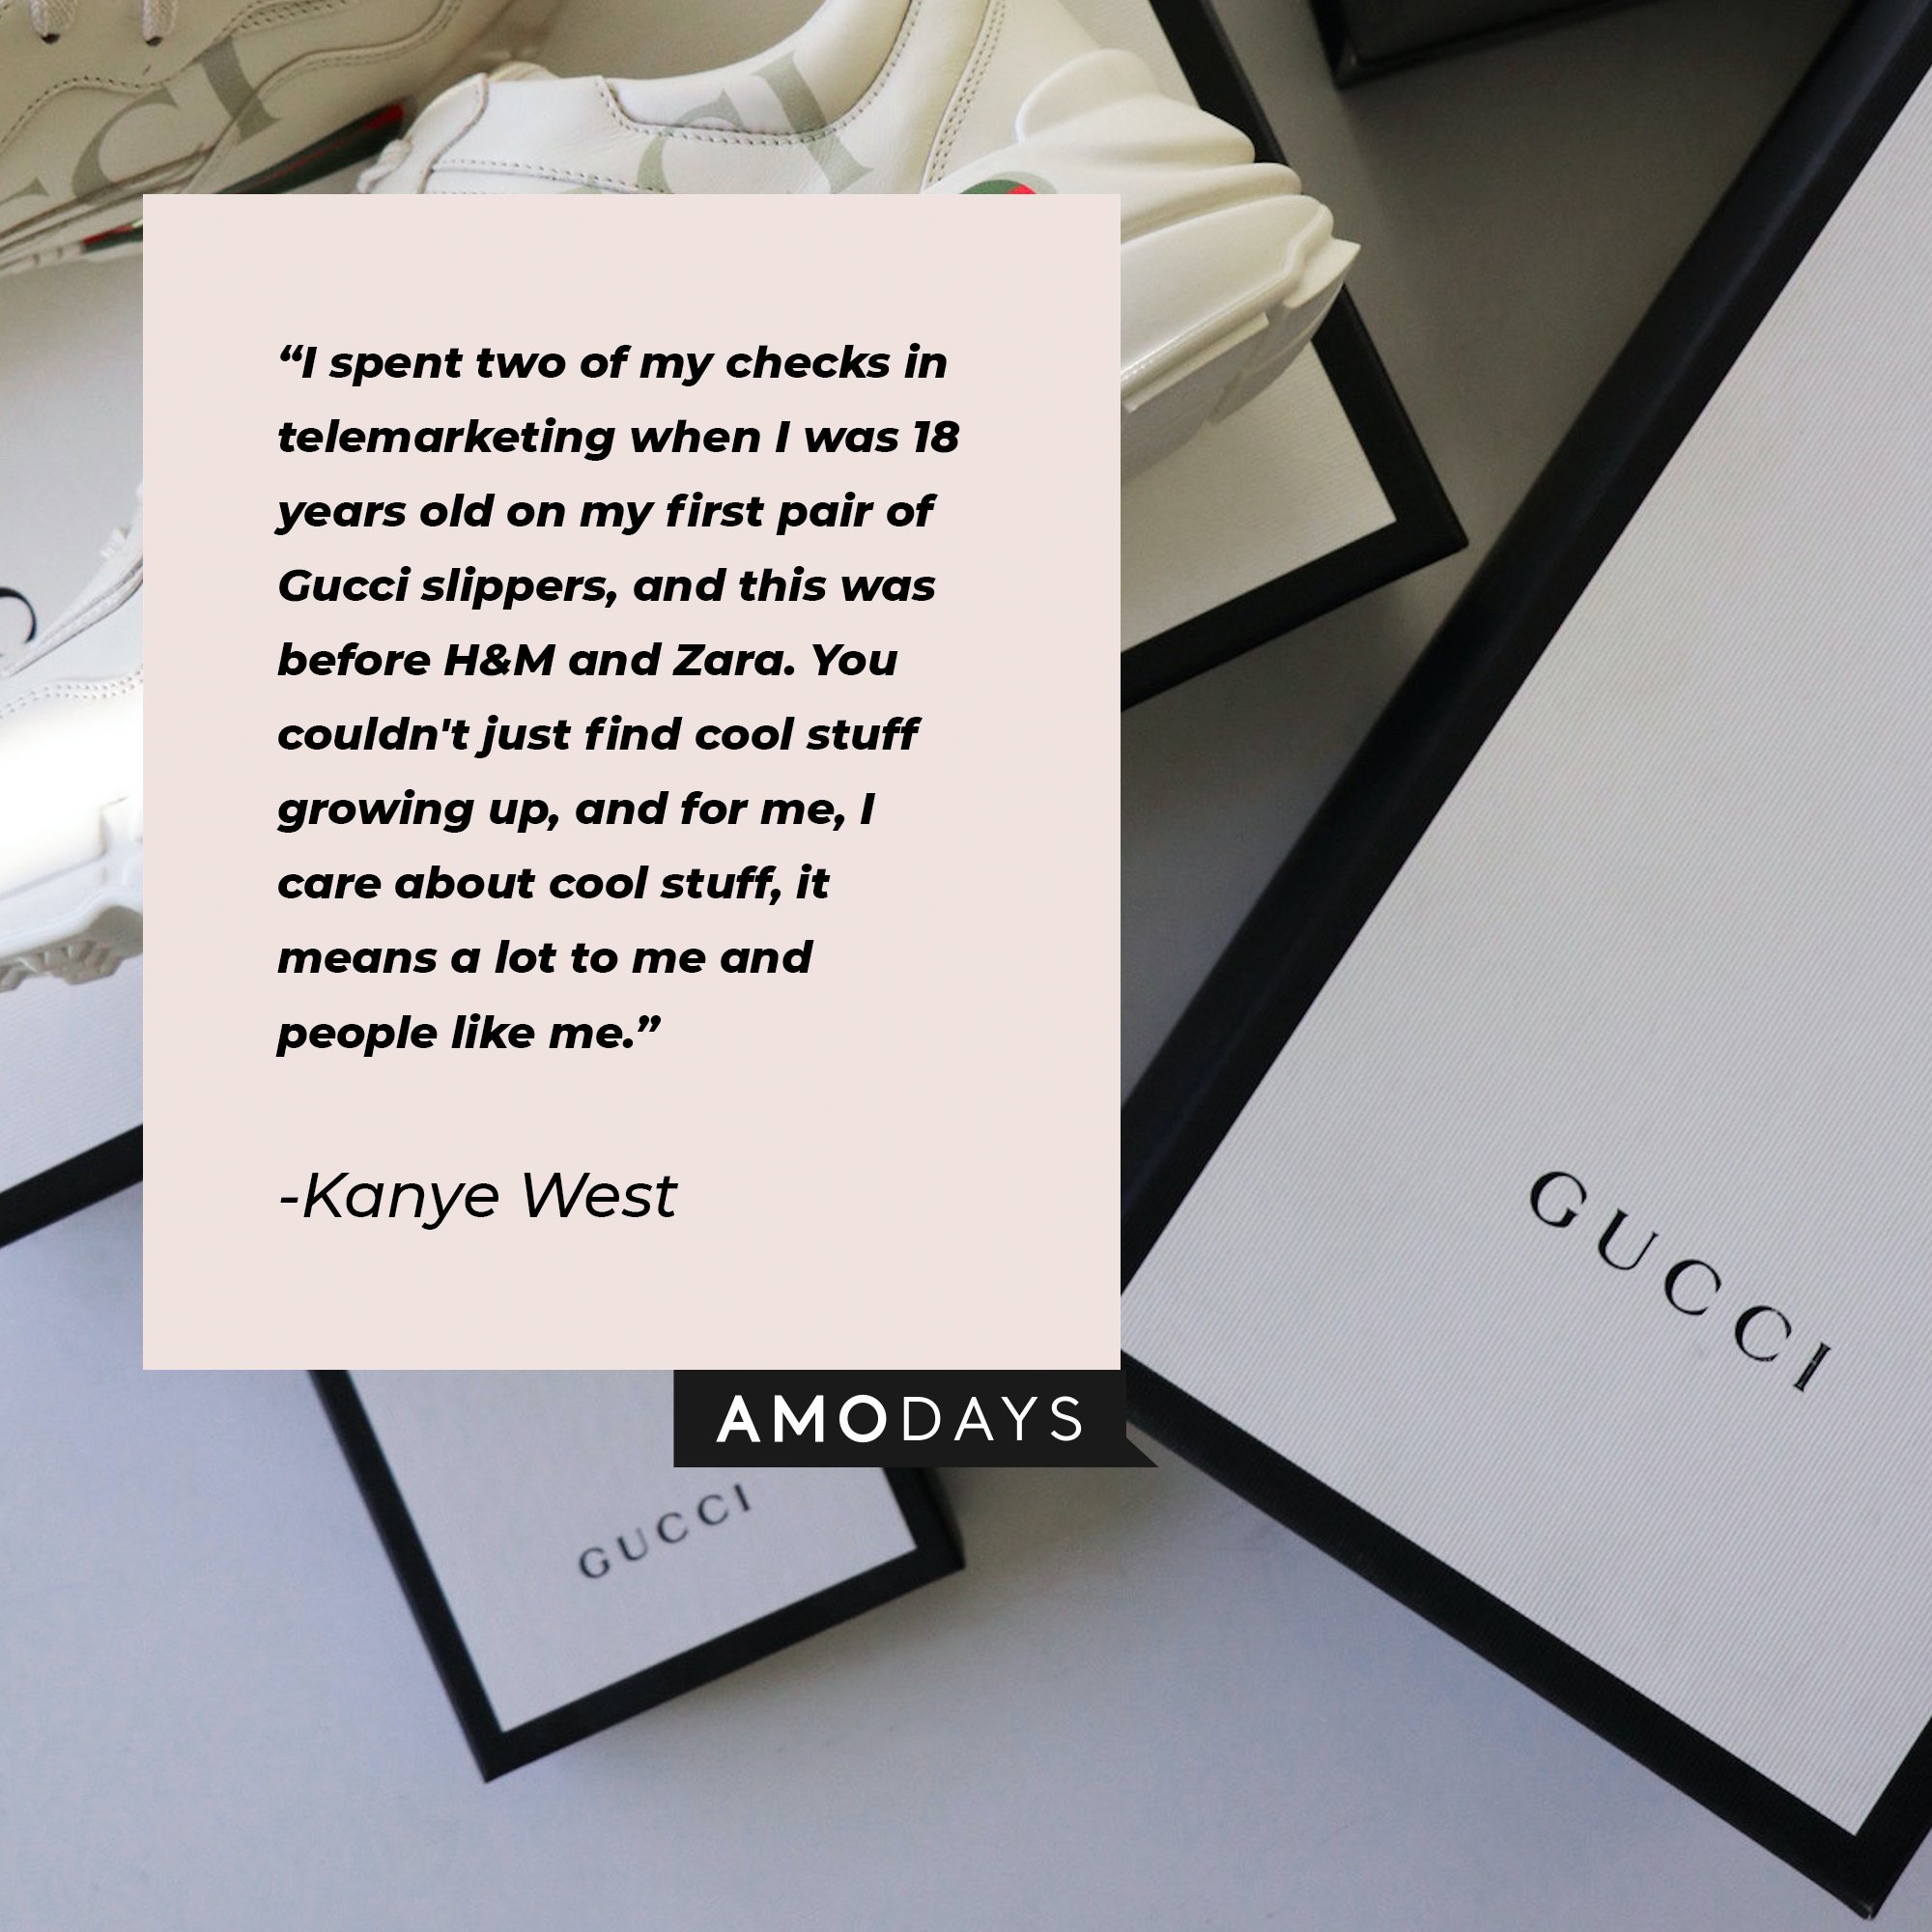 Kanye West's quote "I spent two of my checks in telemarketing when I was 18 years old on my first pair of Gucci slippers, and this was before H&M and Zara. You couldn't just find cool stuff growing up, and for me, I care about cool stuff, it means a lot to me and people like me." | Source: Unsplash.com